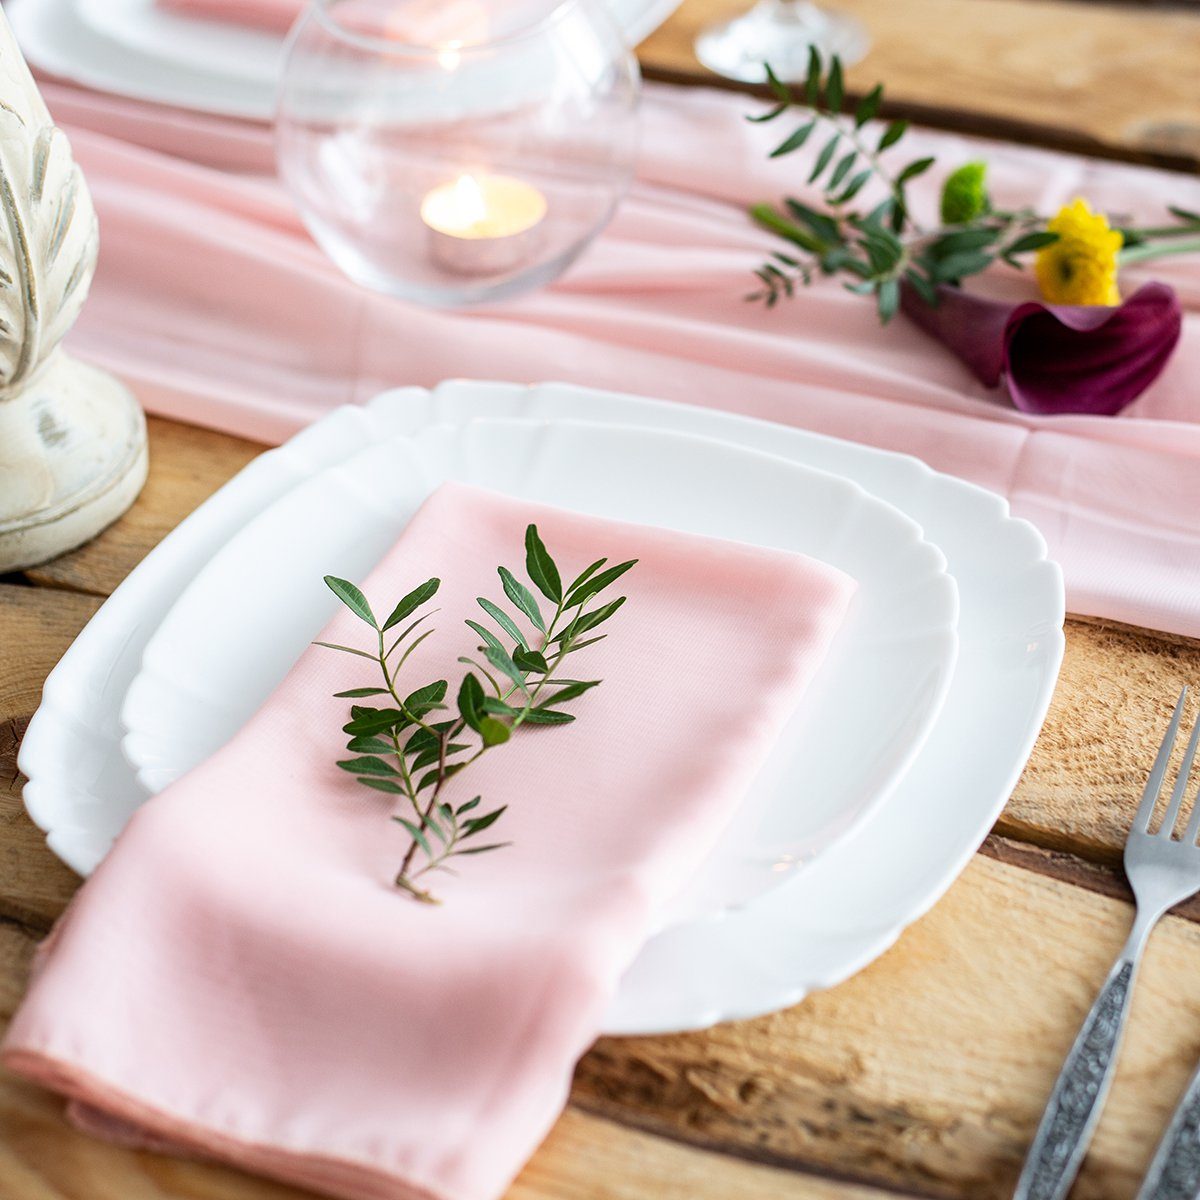 Rustic table setting: pink napkin folded on a plate, next to a champagne glass